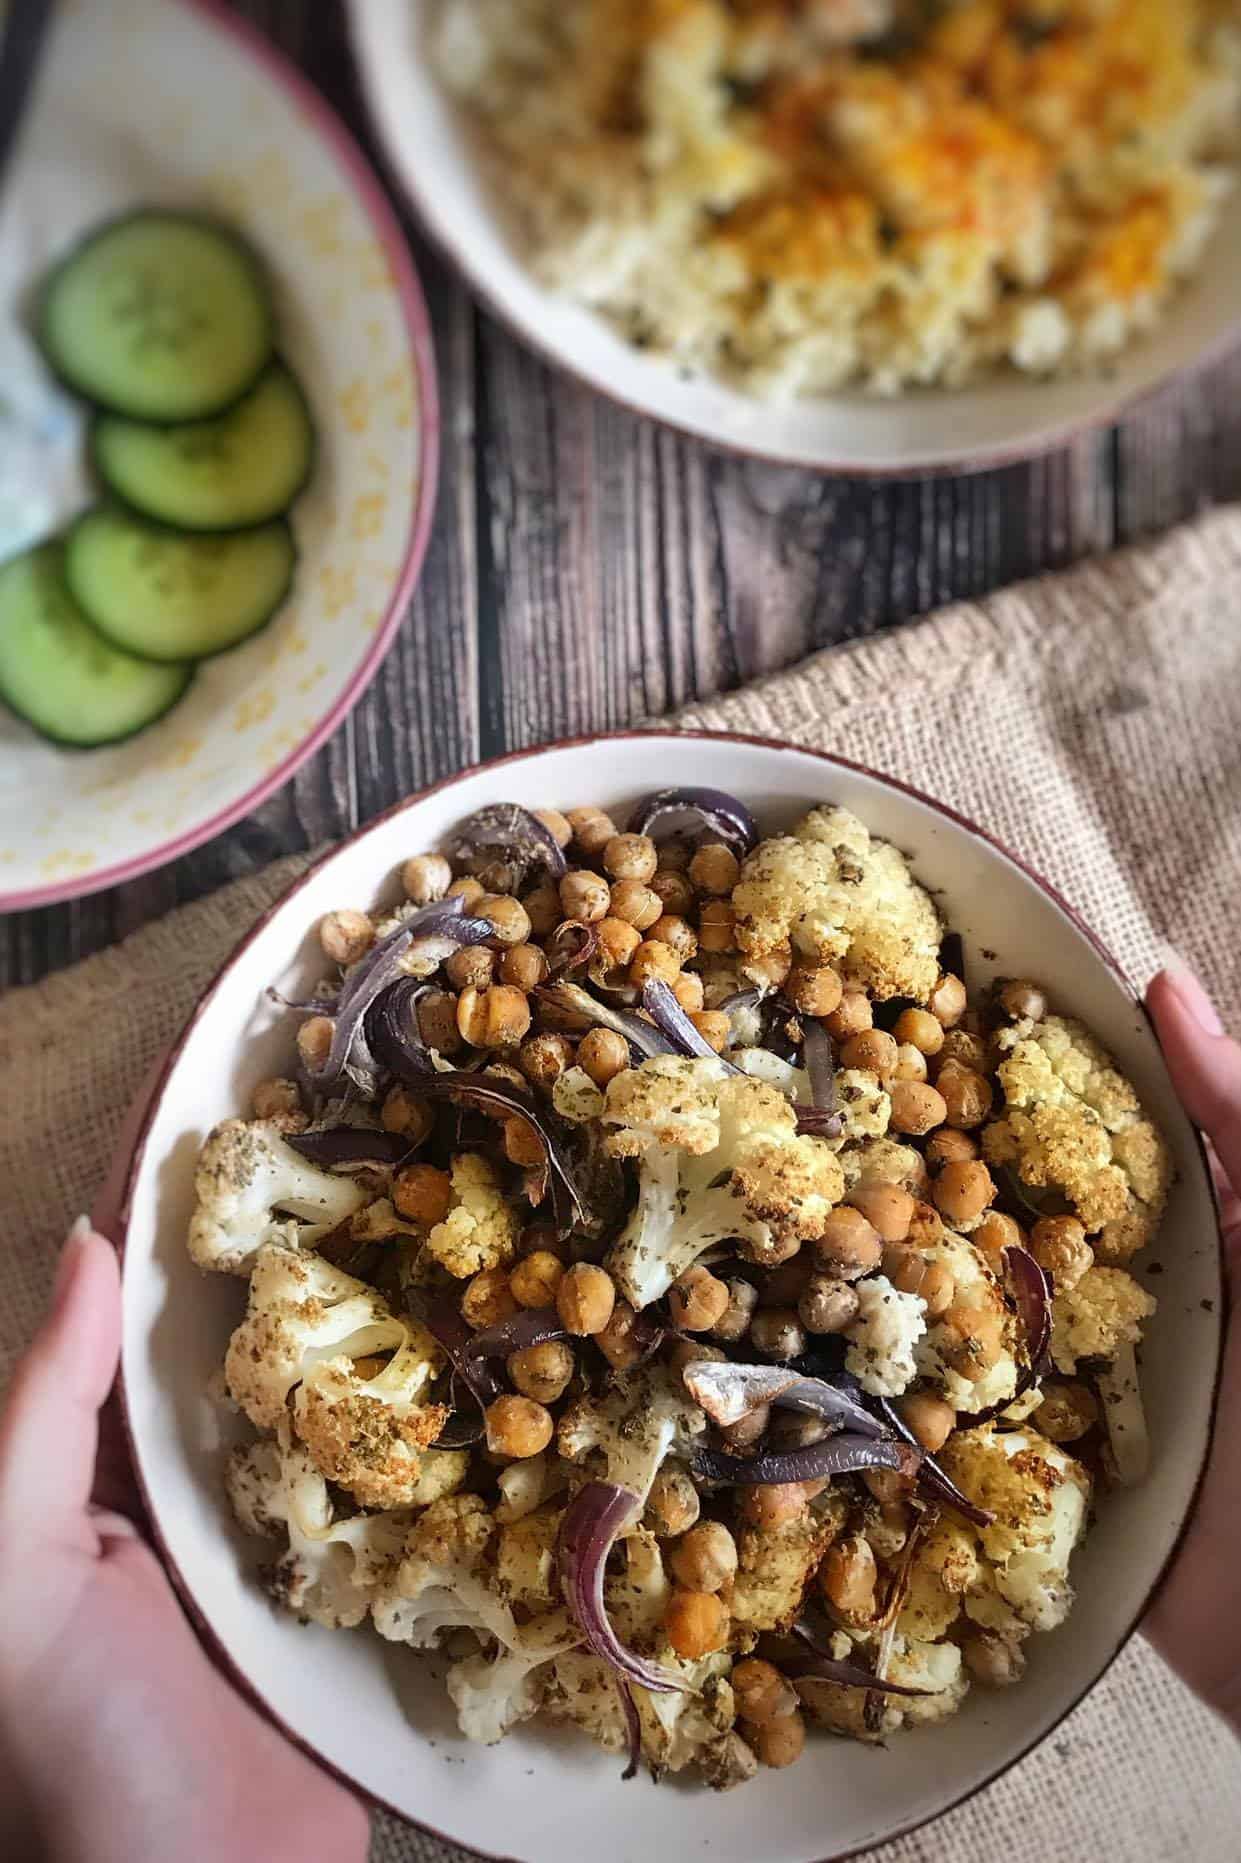 Roasted Cauliflower and Chickpeas in a bowl with couscous and vegan tzatziki.